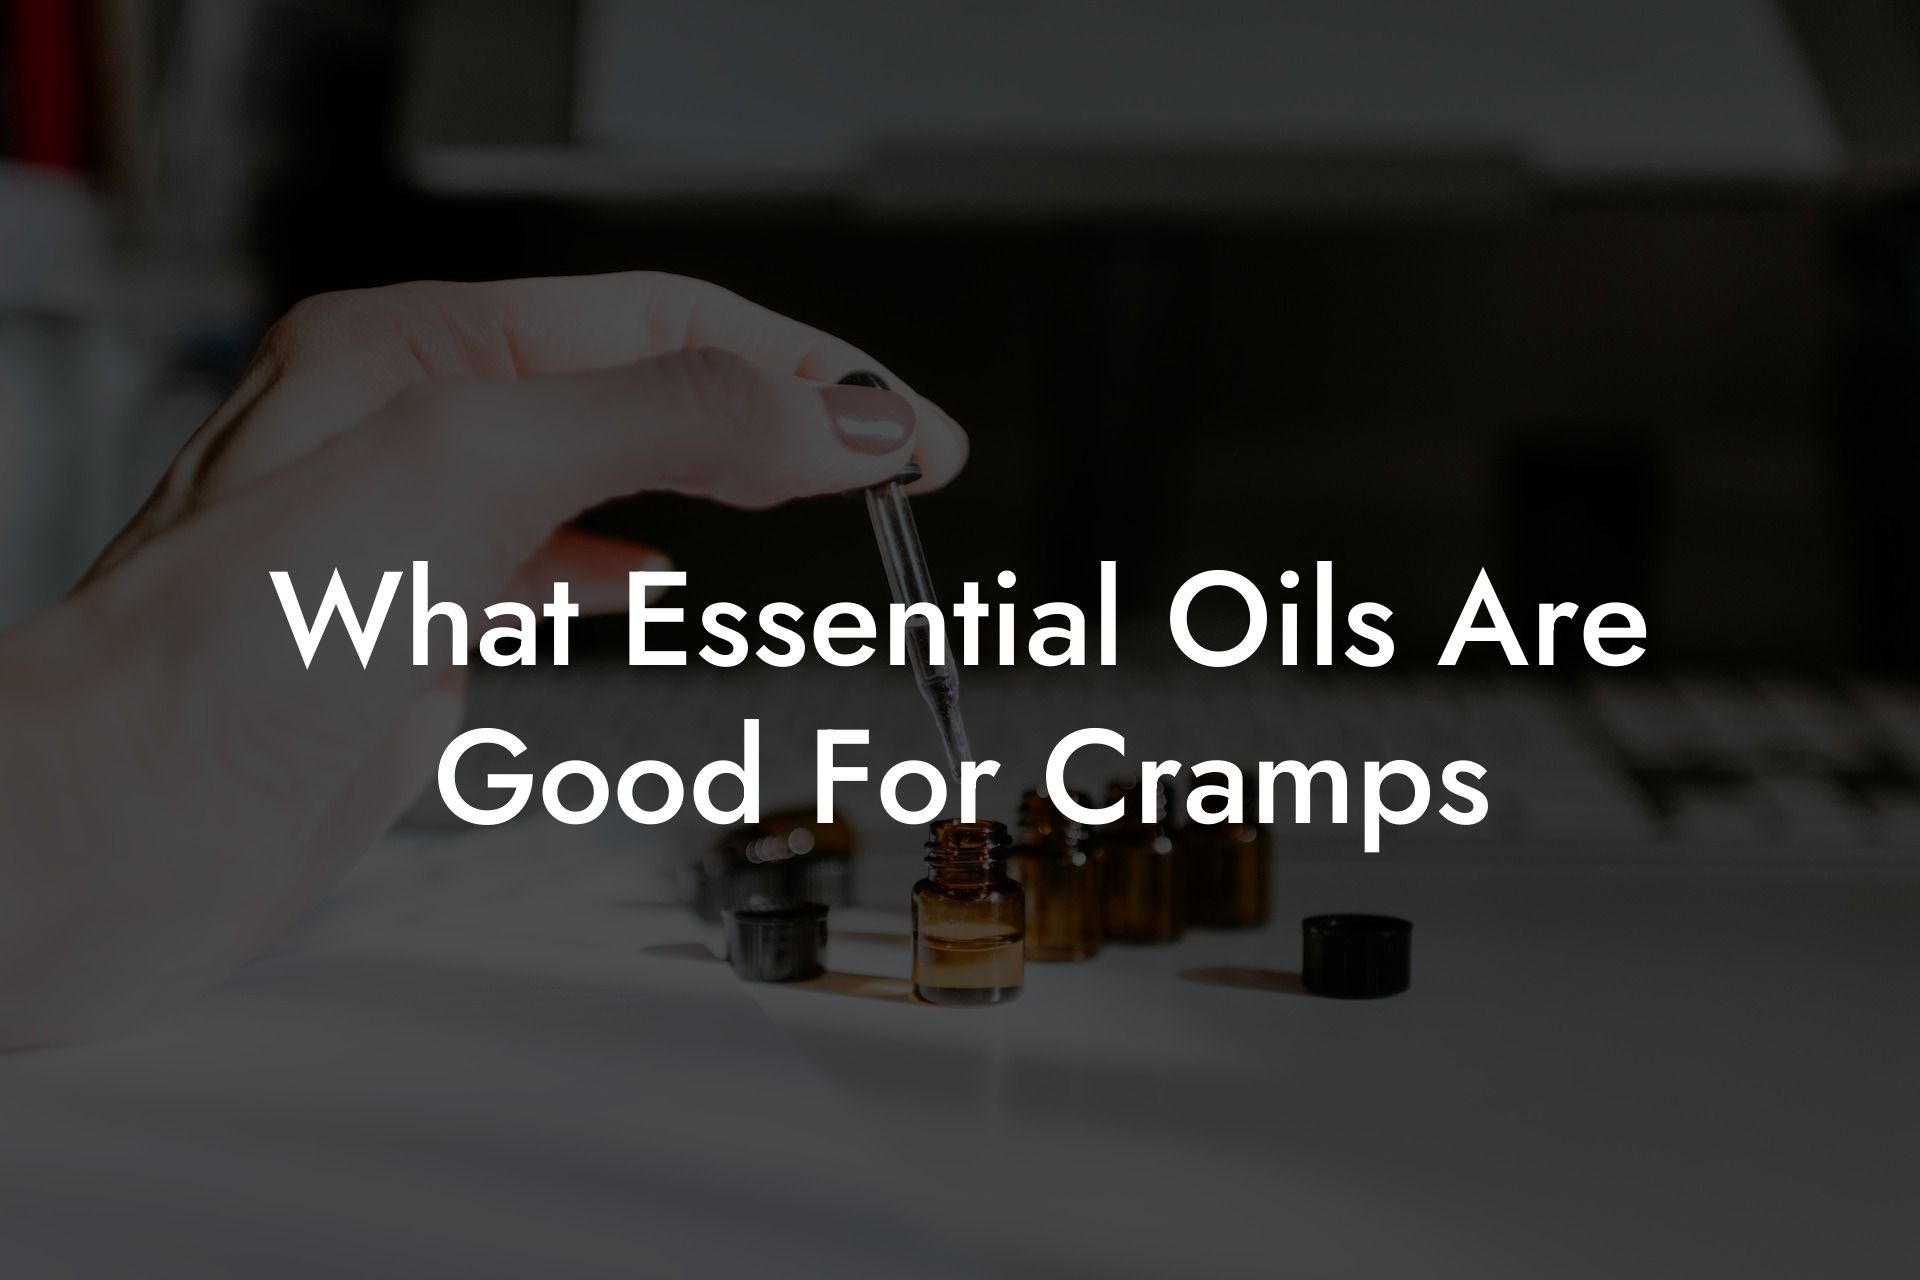 What Essential Oils Are Good For Cramps